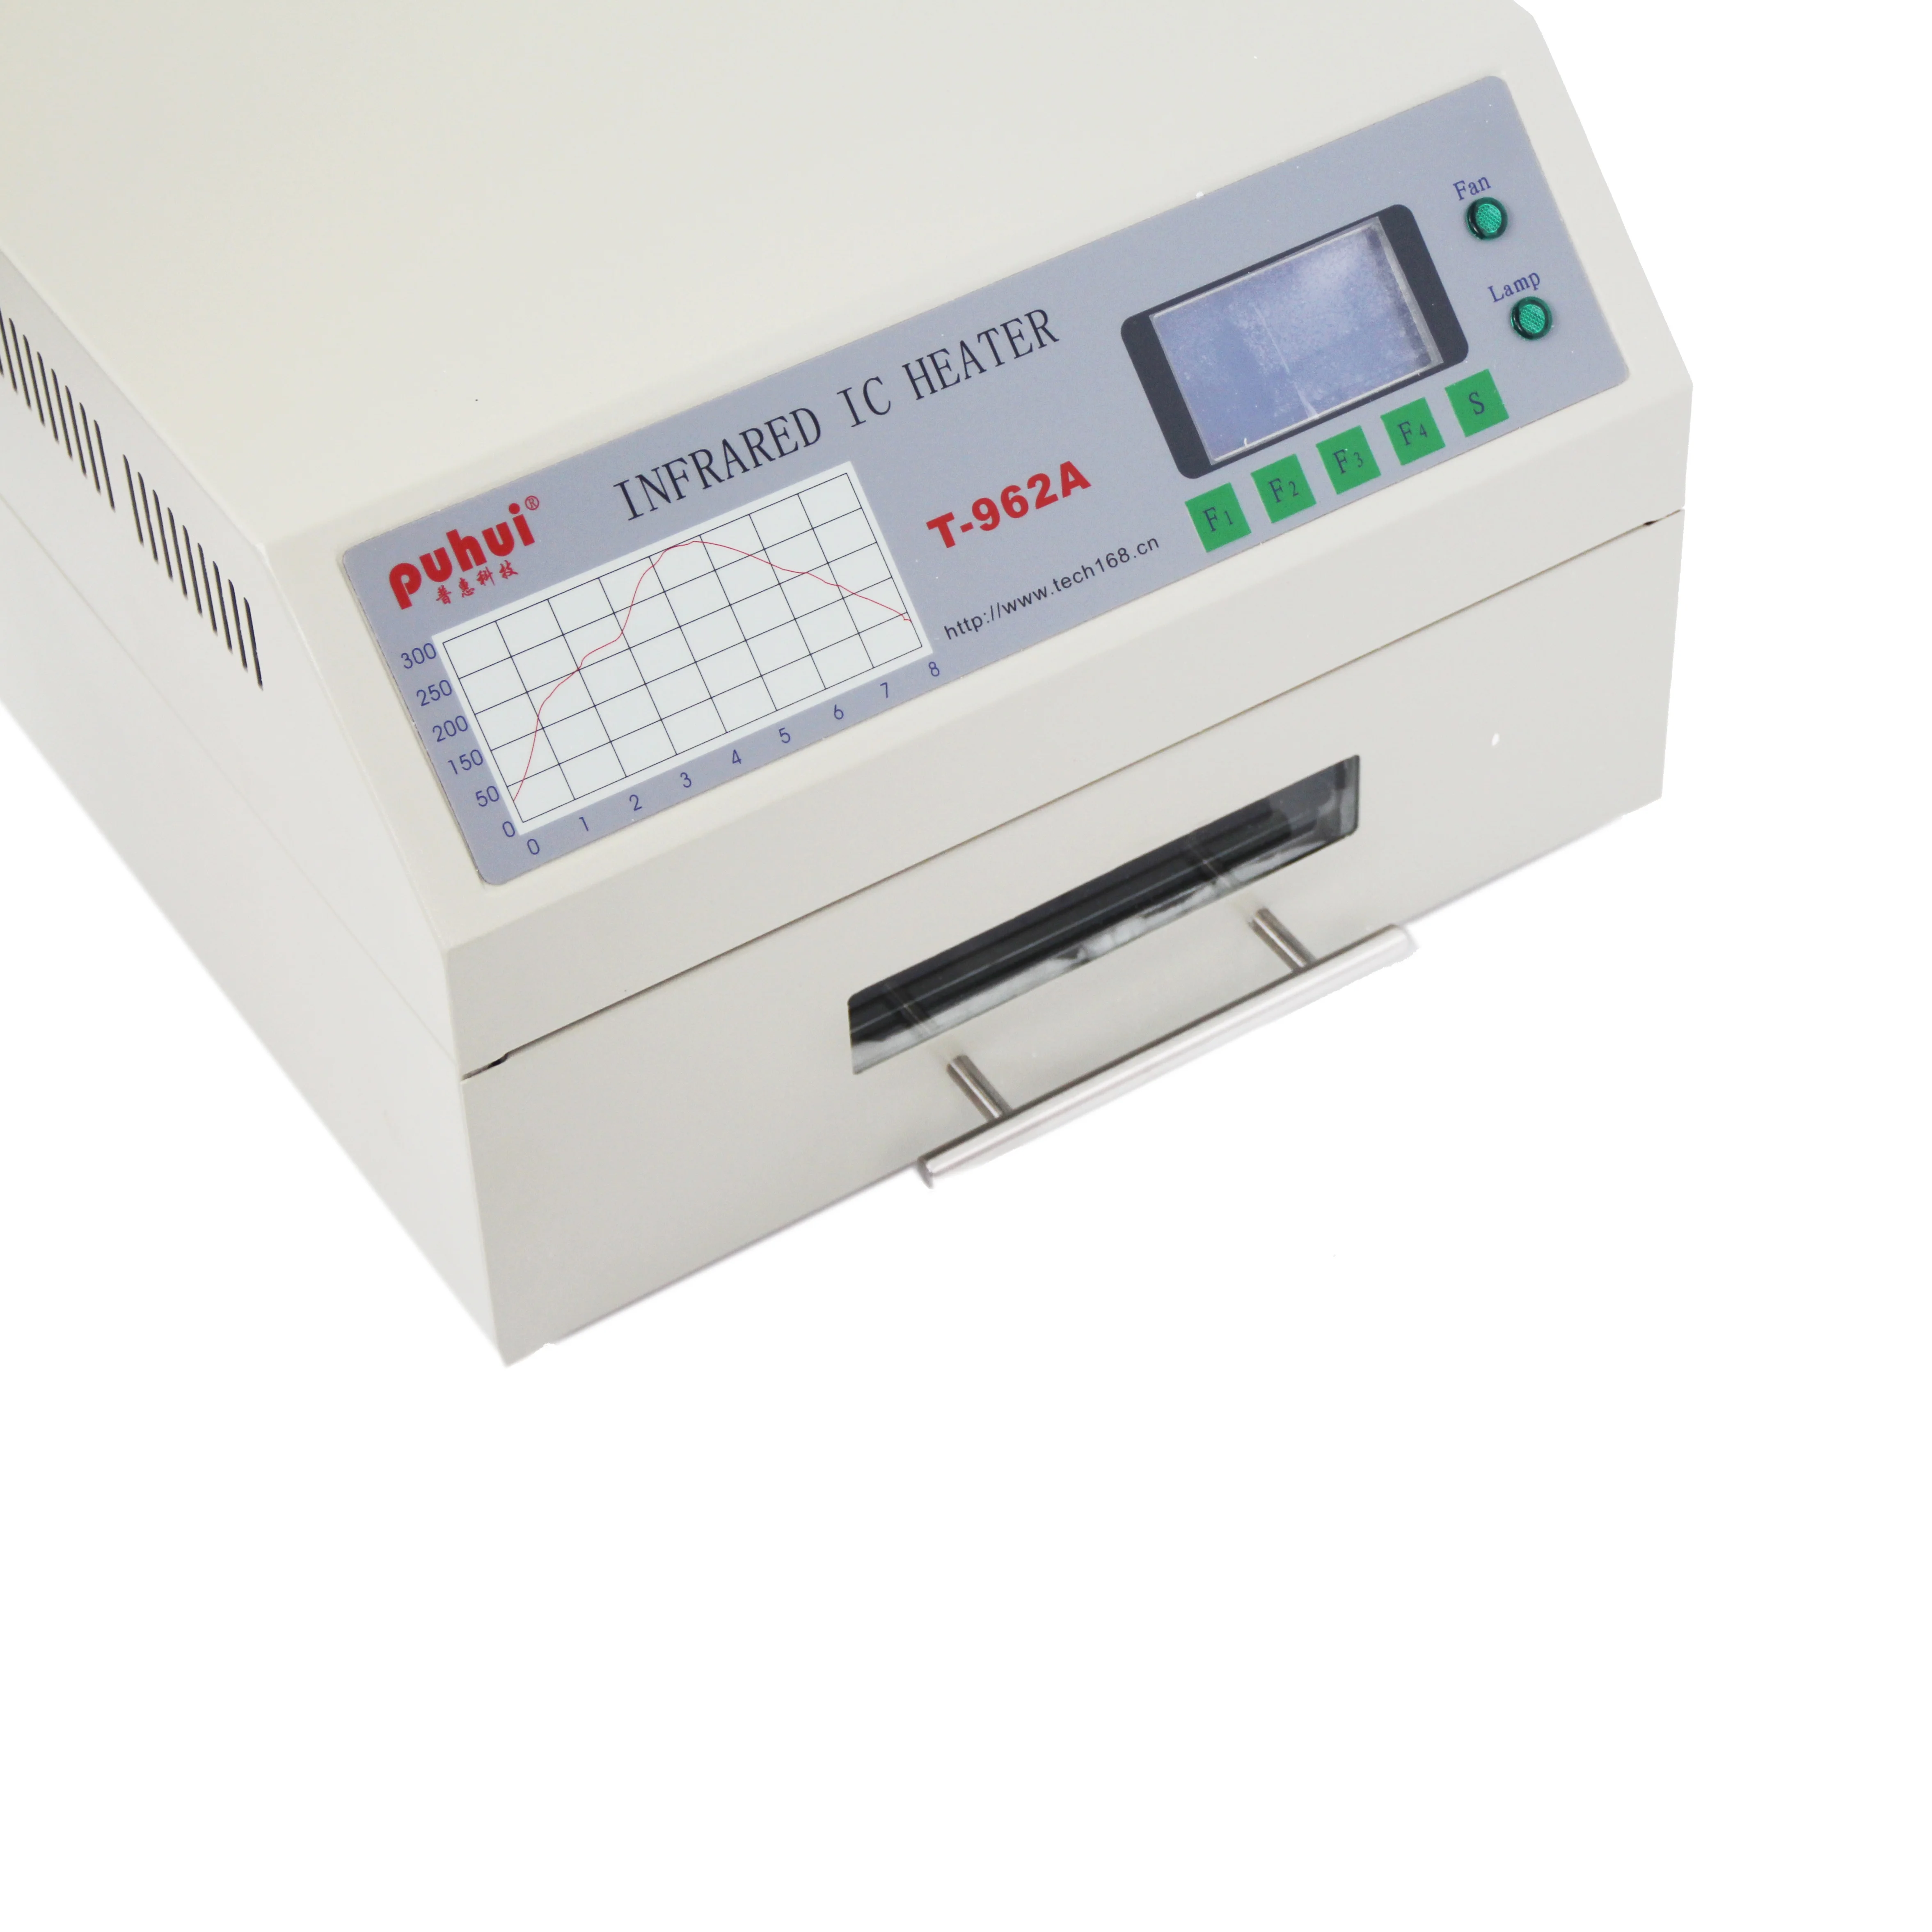 

T962A Infrared Reflow Oven 1500W 300 x 320mm Infrared IC Heater T-962A for BGA SMD SMT Rework